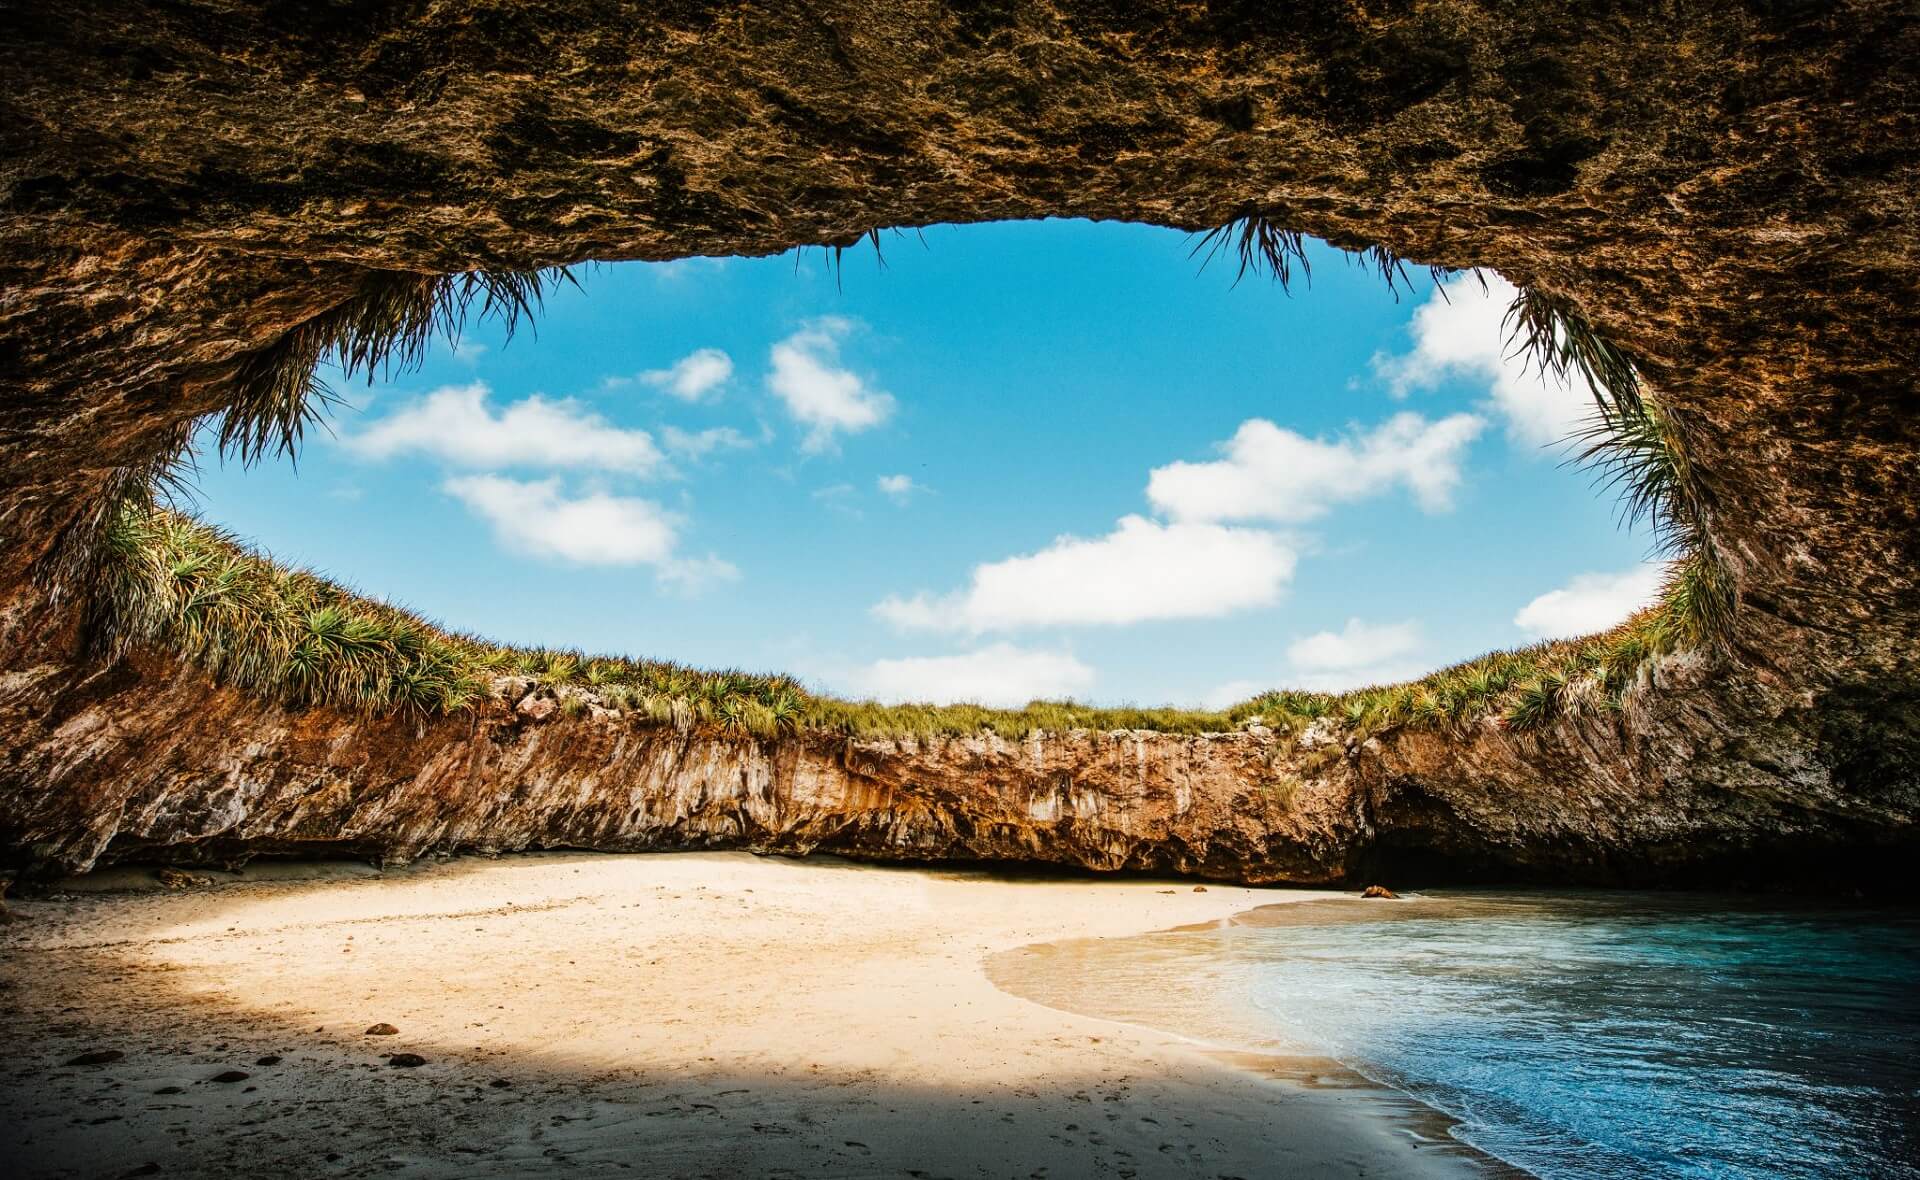 Hidden beach on the island that contains the explosive device